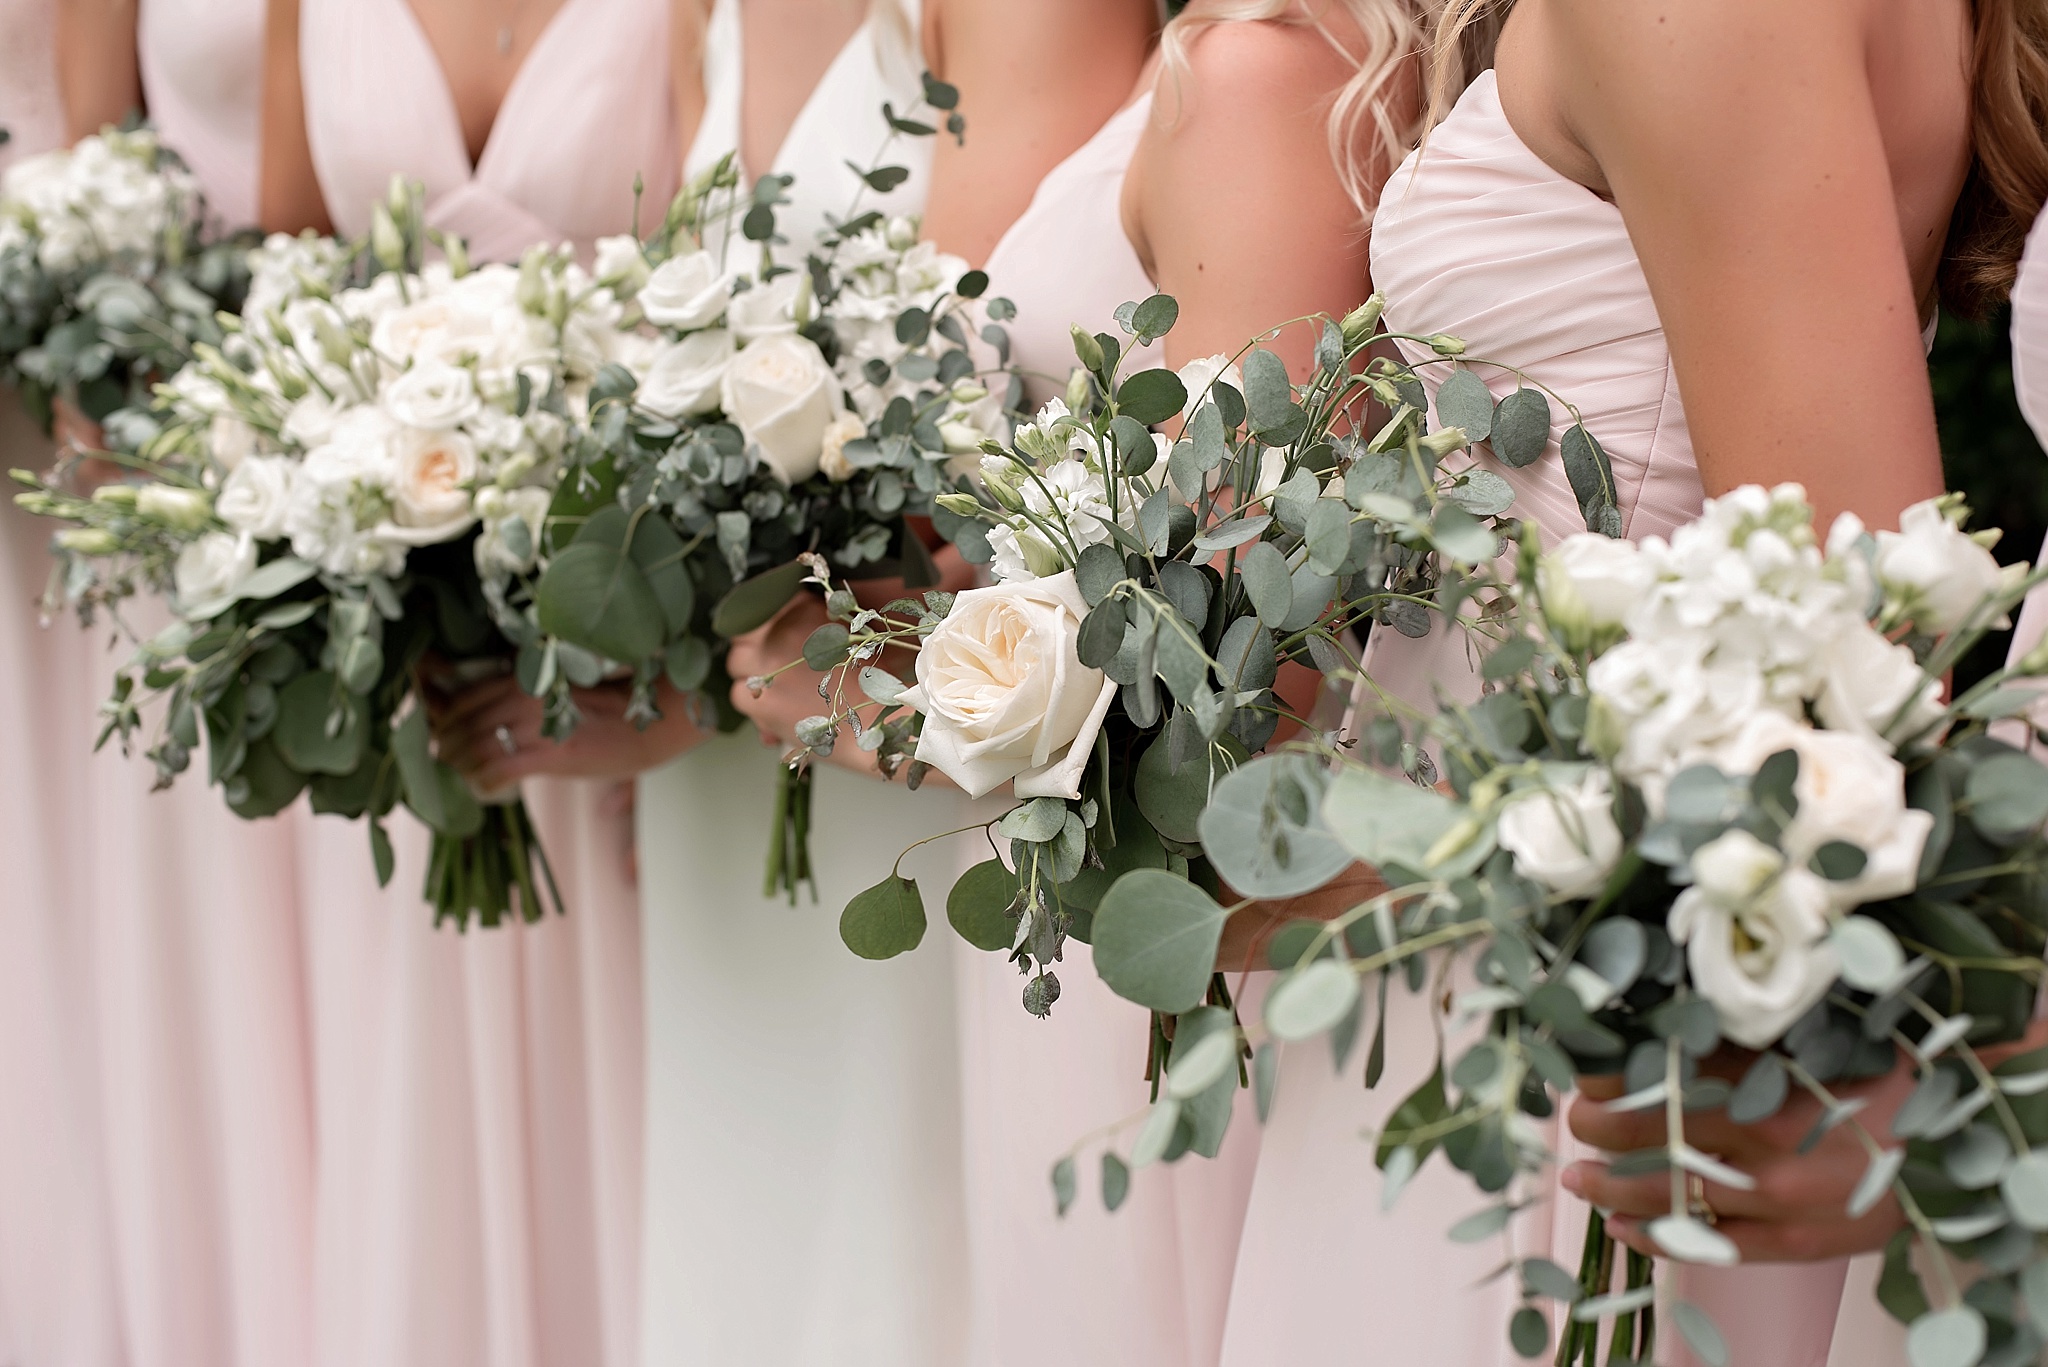 blush bridesmaid dresses with white florals